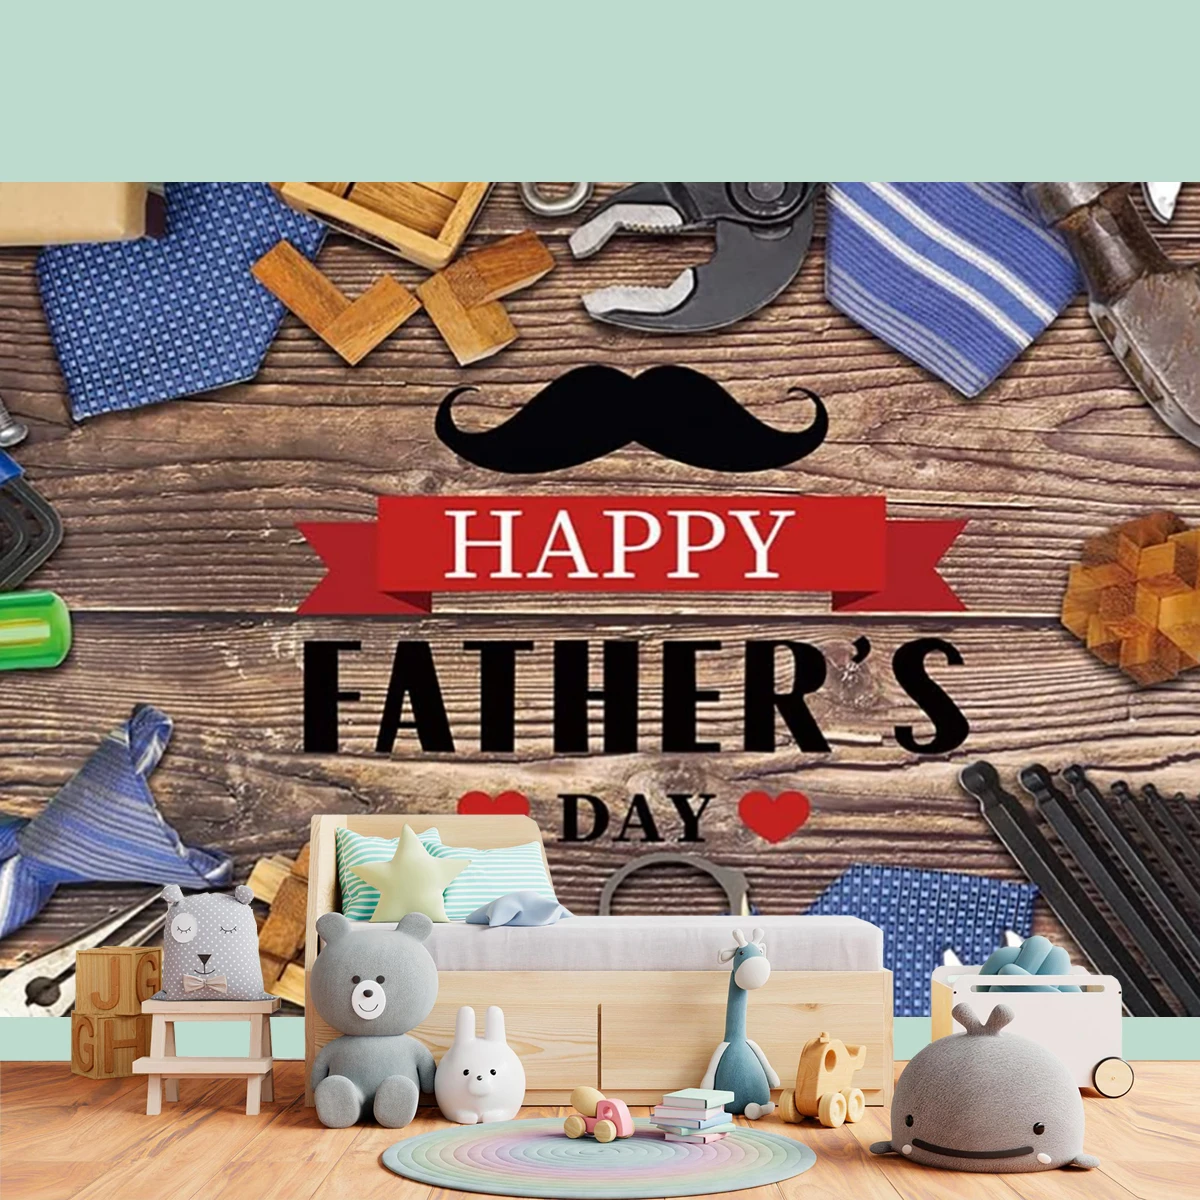 Happy Fathers Day Backdrop Fixing Tools Wooden Background Banners Shirt  for Father's Papa Mustache Photo Booth Prop Decorations enlarge